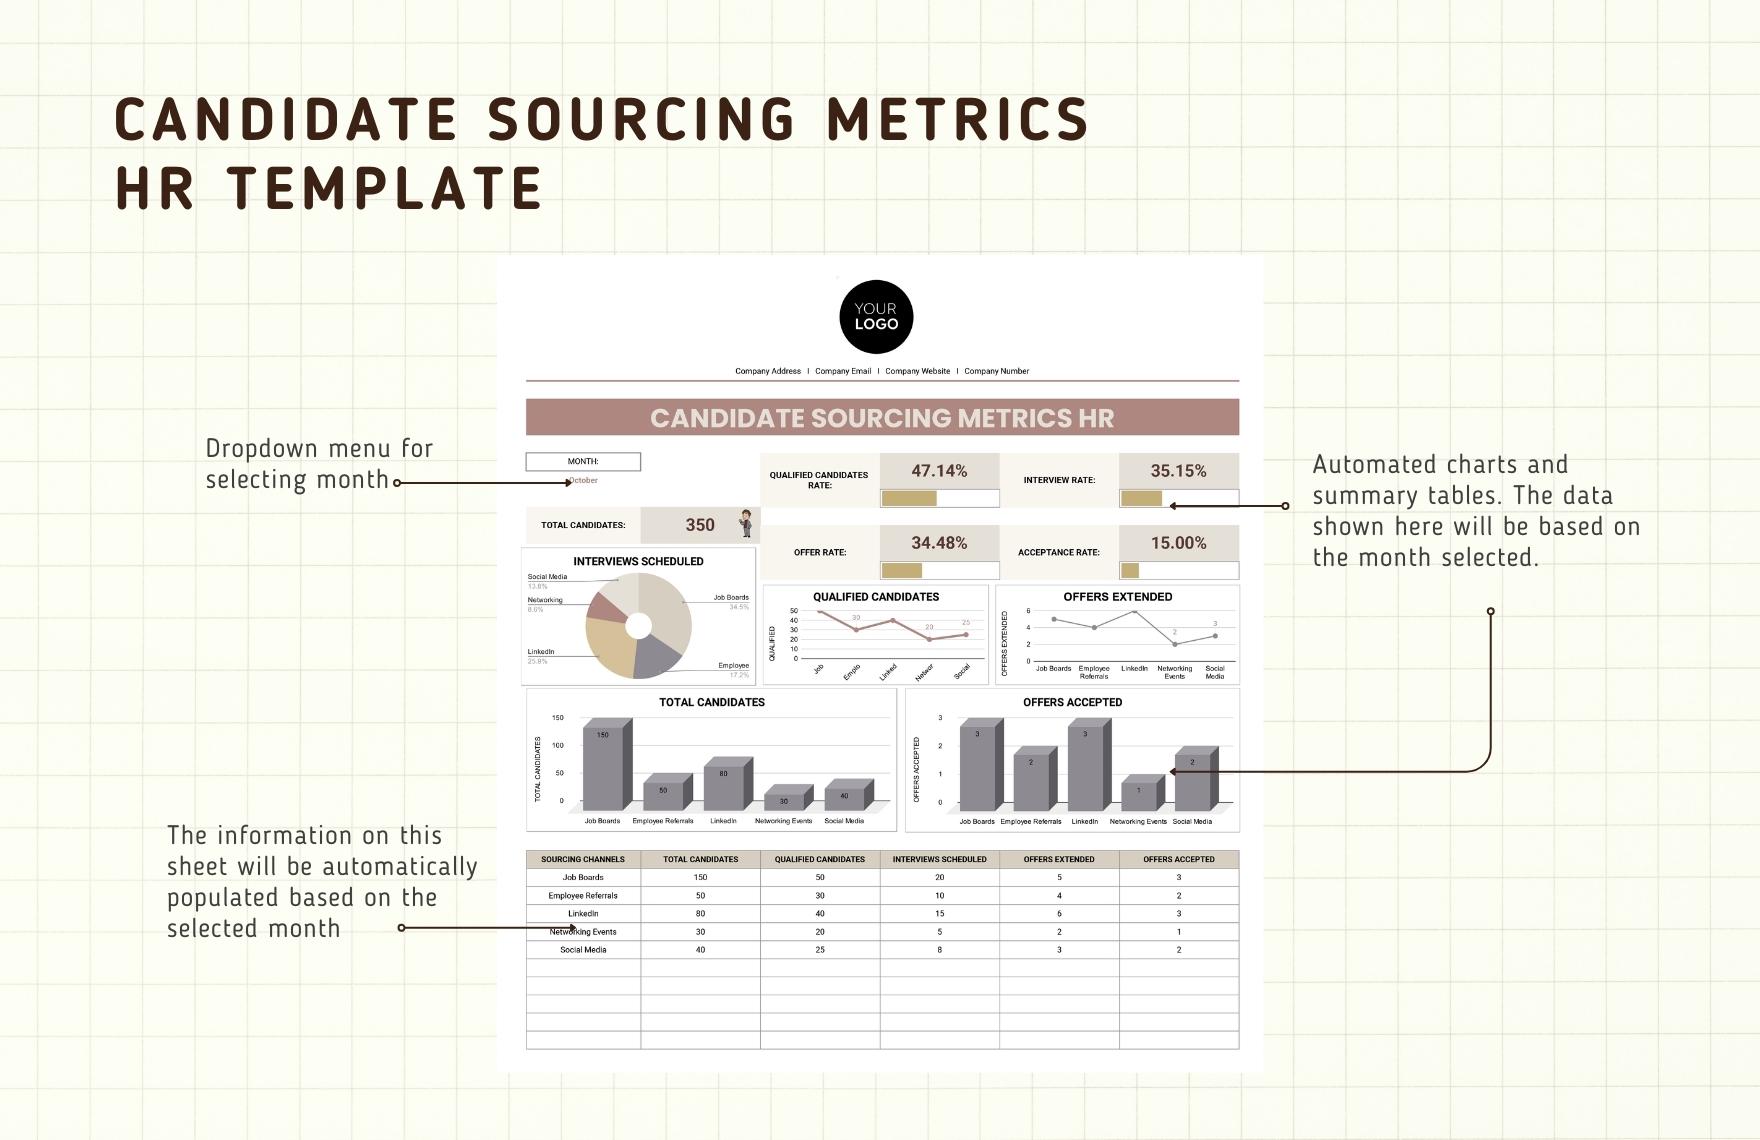 Candidate Sourcing Metrics HR Template